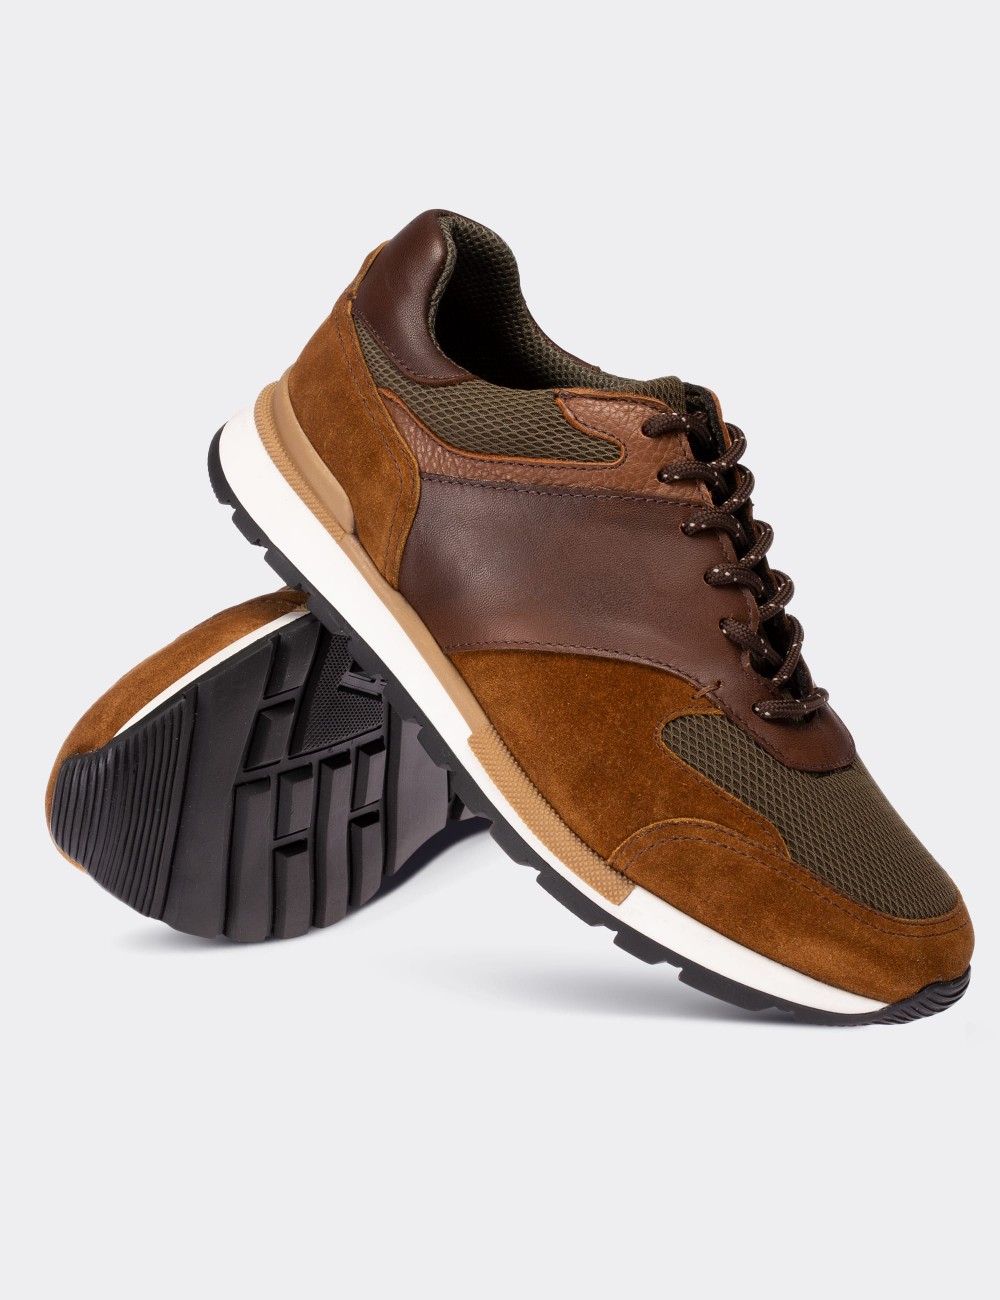 Brown Suede Leather Sneakers - 01718MKHVT02